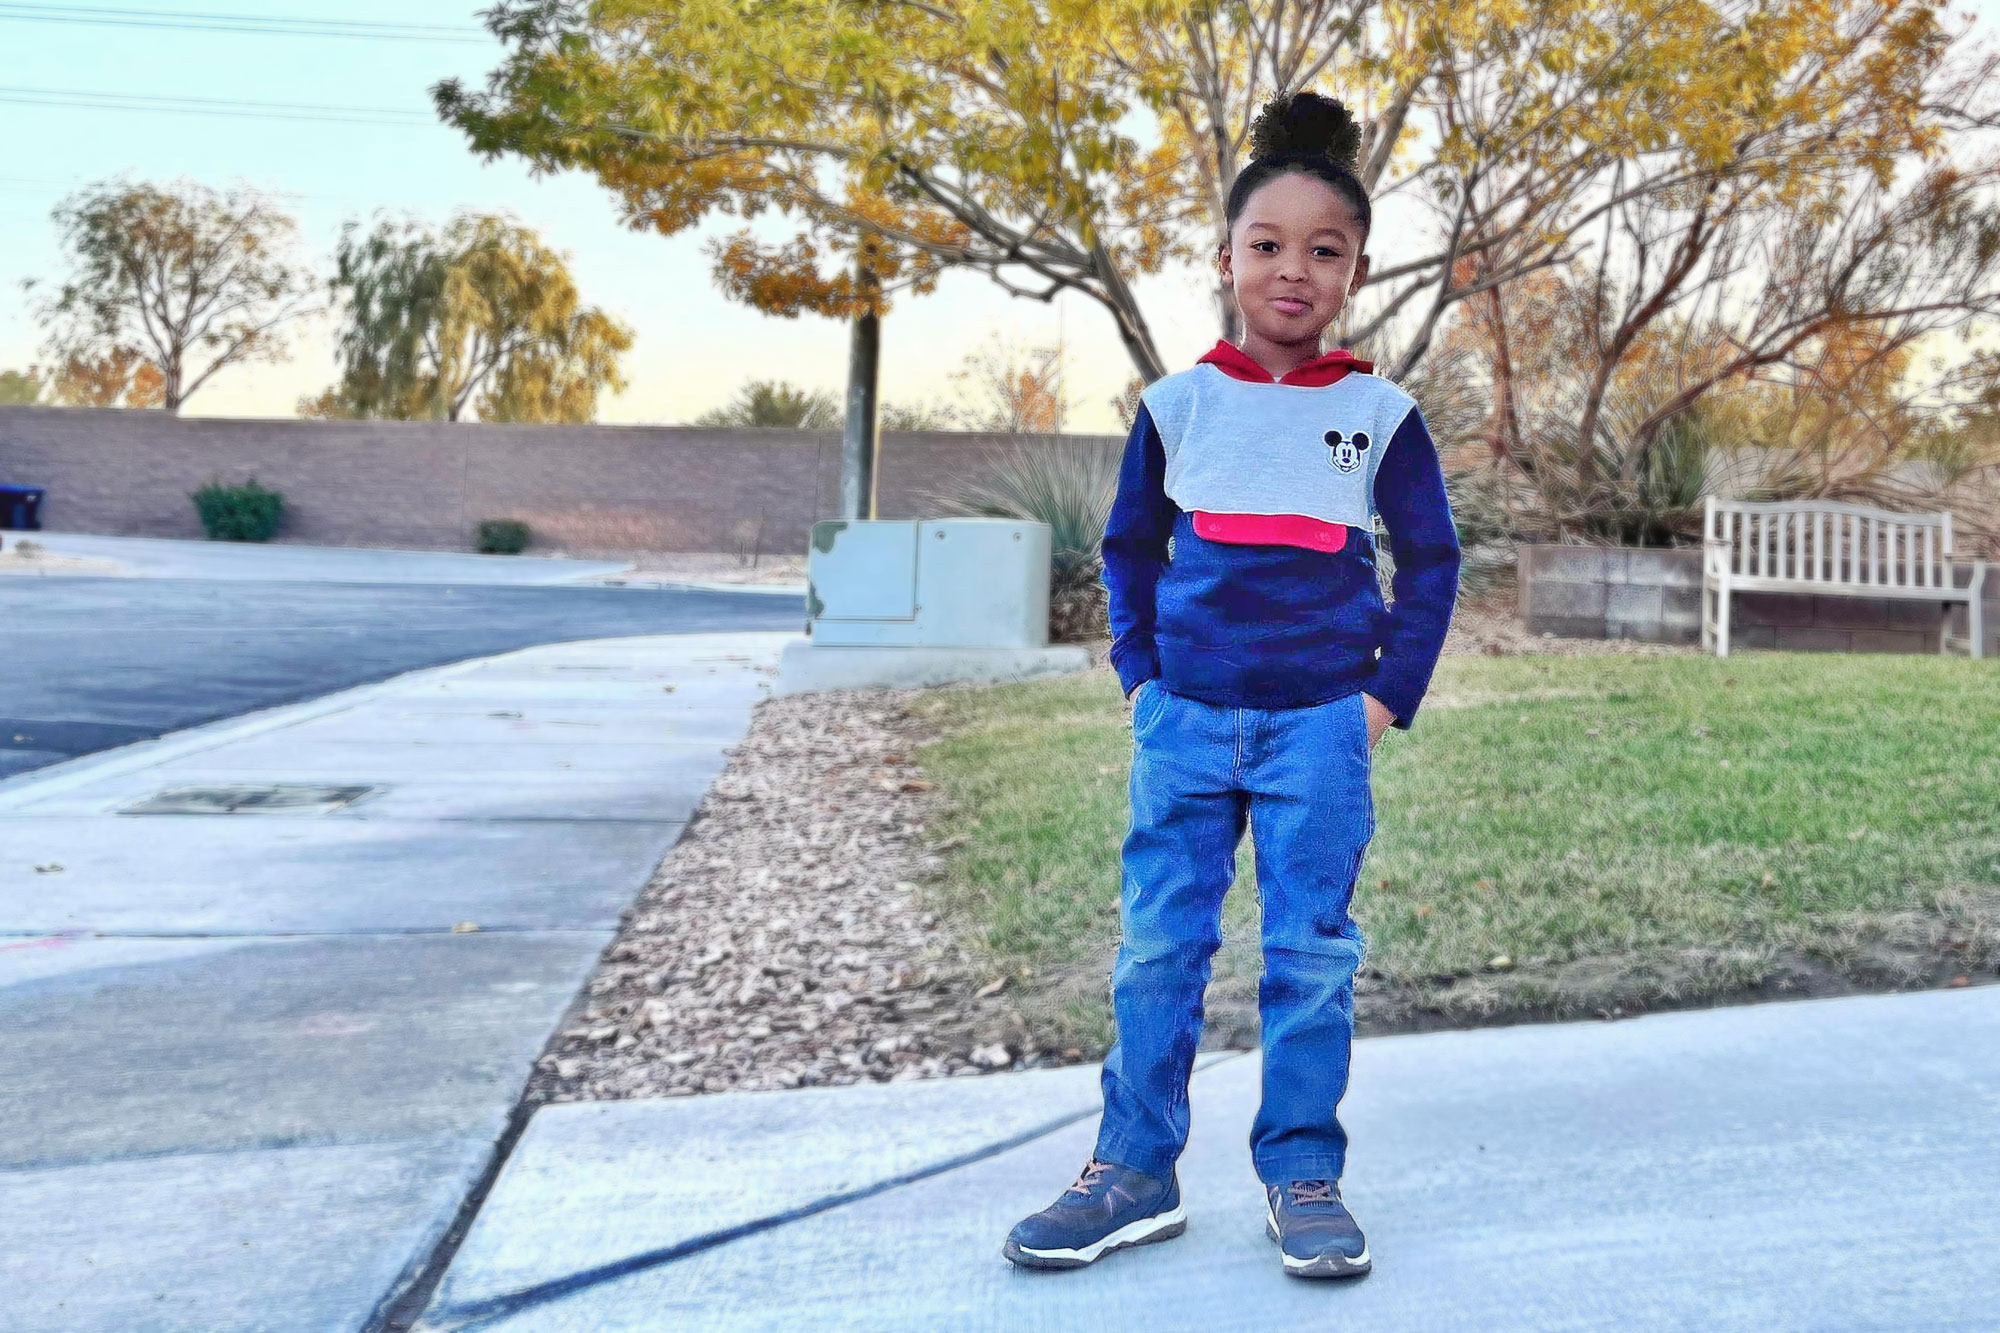  Stride Rite, children’s shoes, baby shoes, kids footwear, kids shoes, kids fashion, kids style, kids ootd, toddler fashion, toddler style, toddler ootd, josiah king bethea